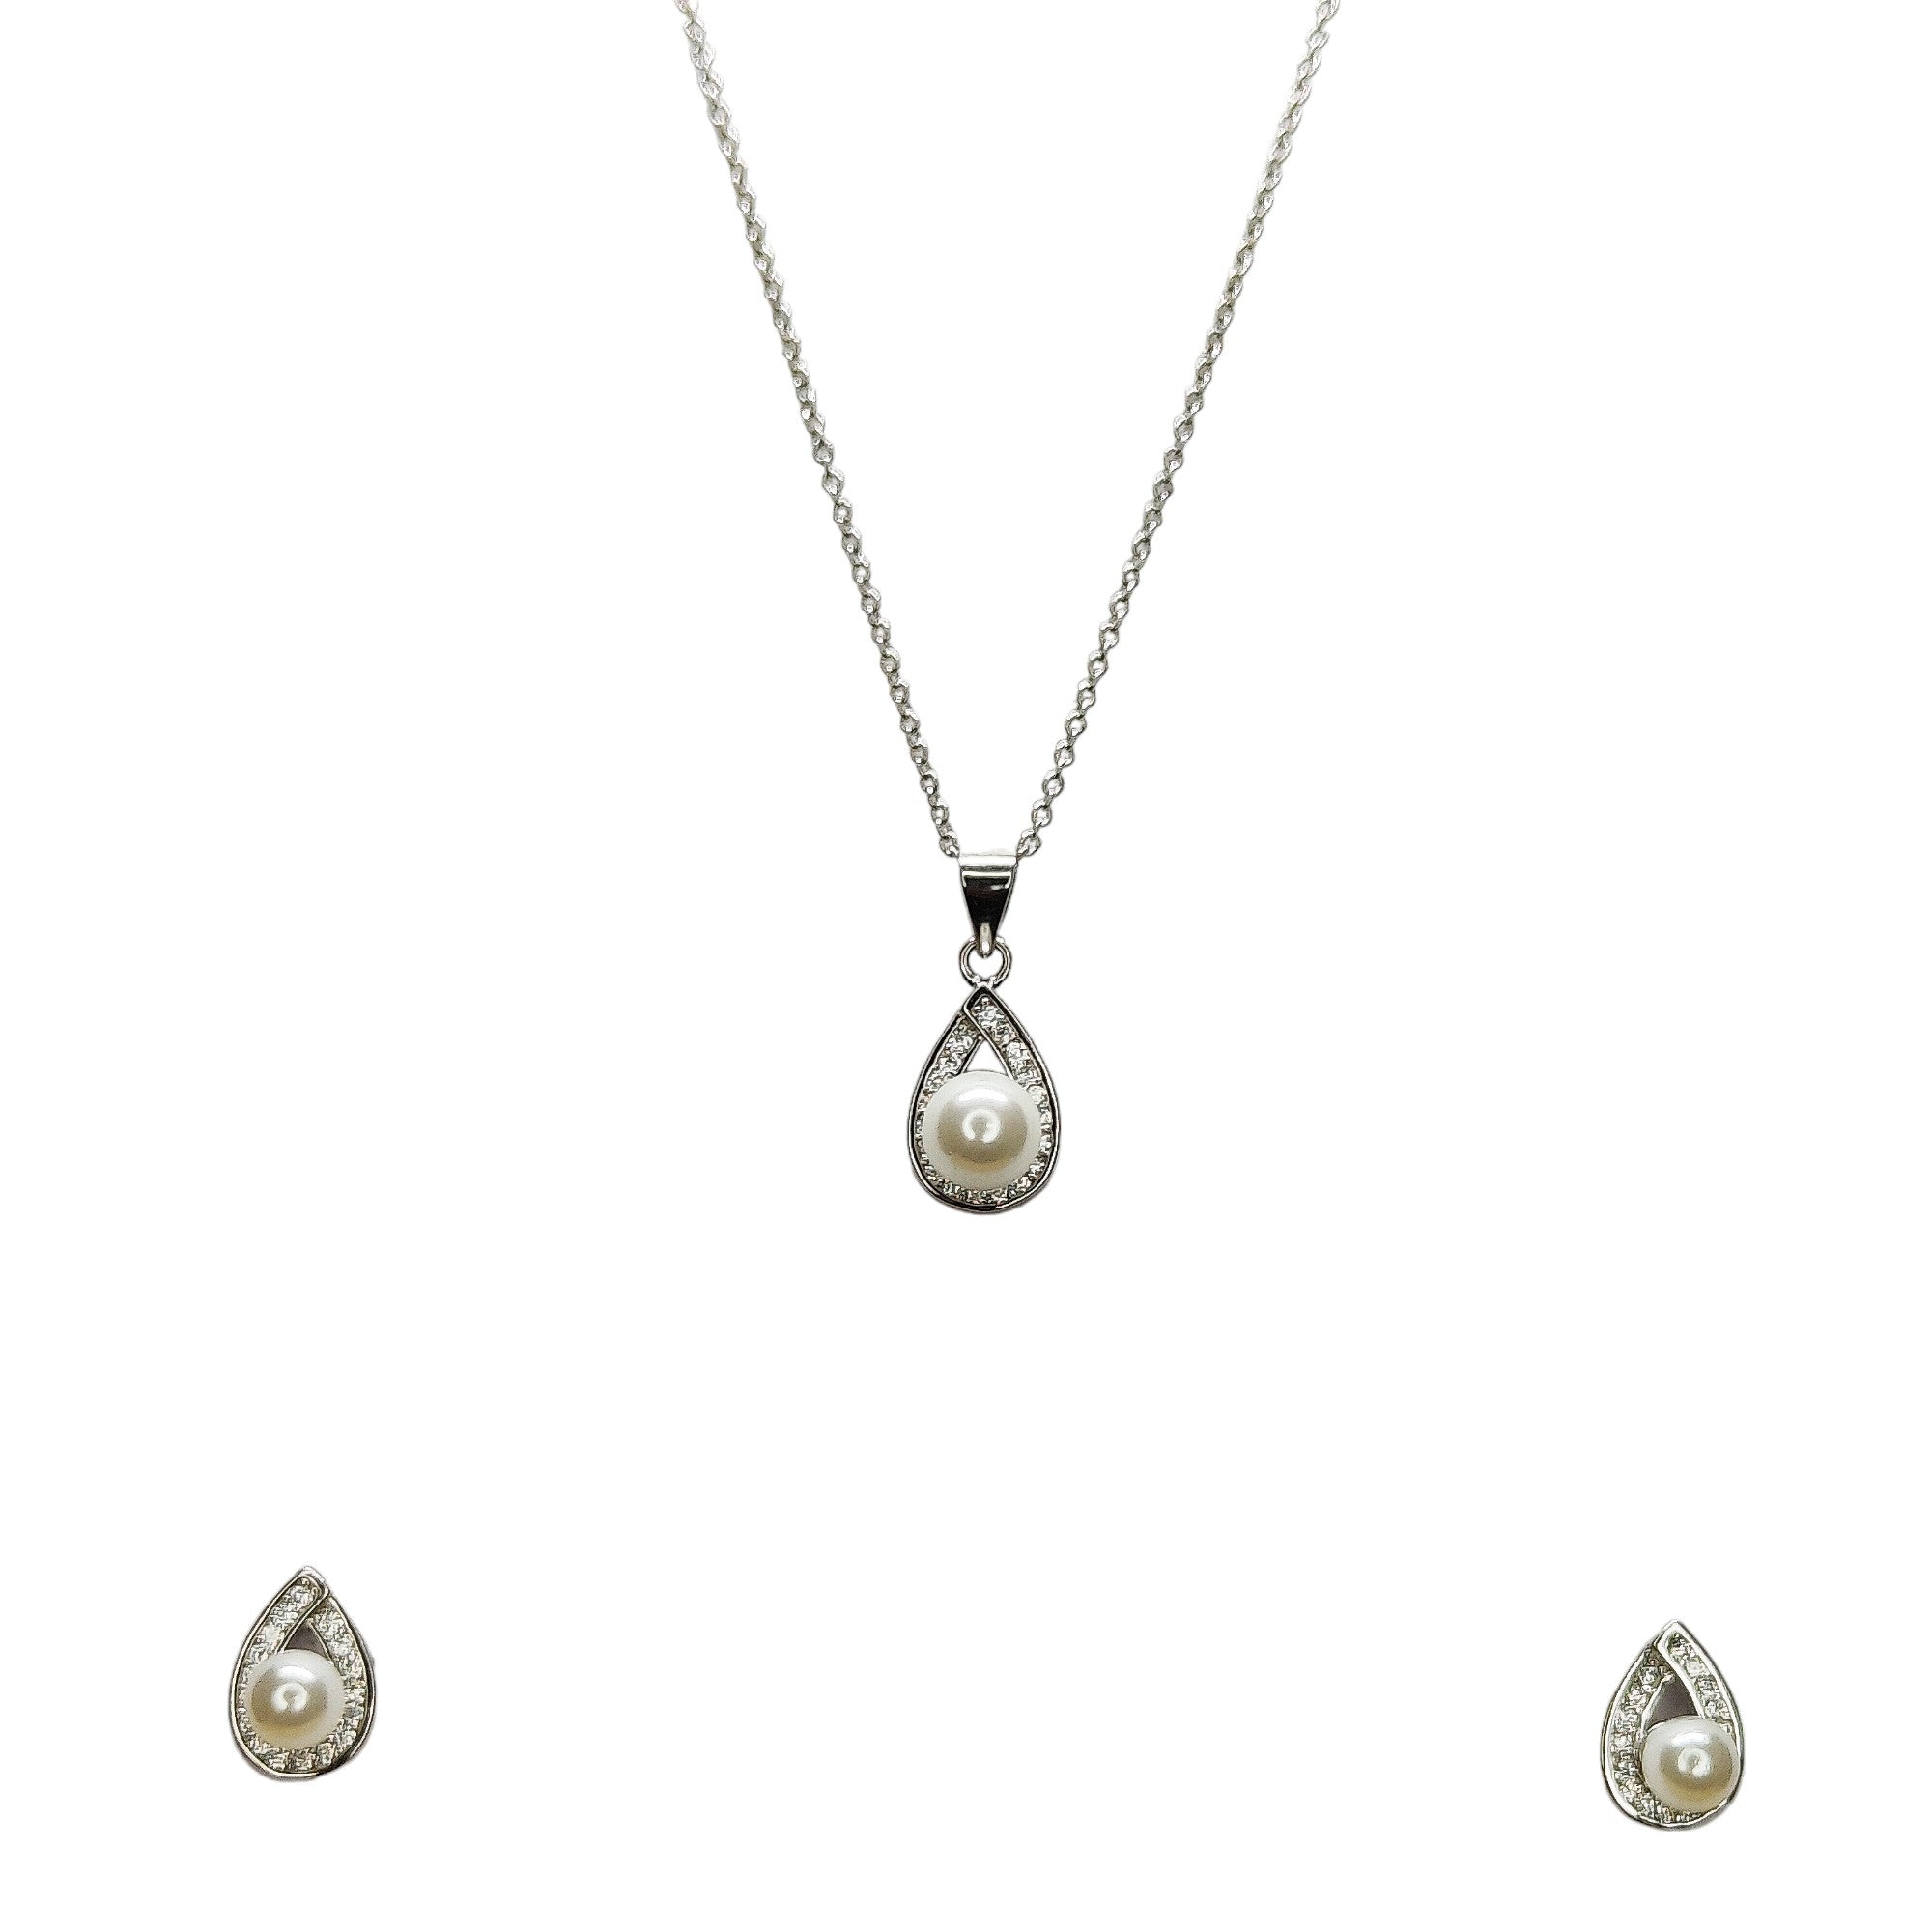 Pearl in Drop Sterling Silver Pendant Set with Chain for Women - Rivansh